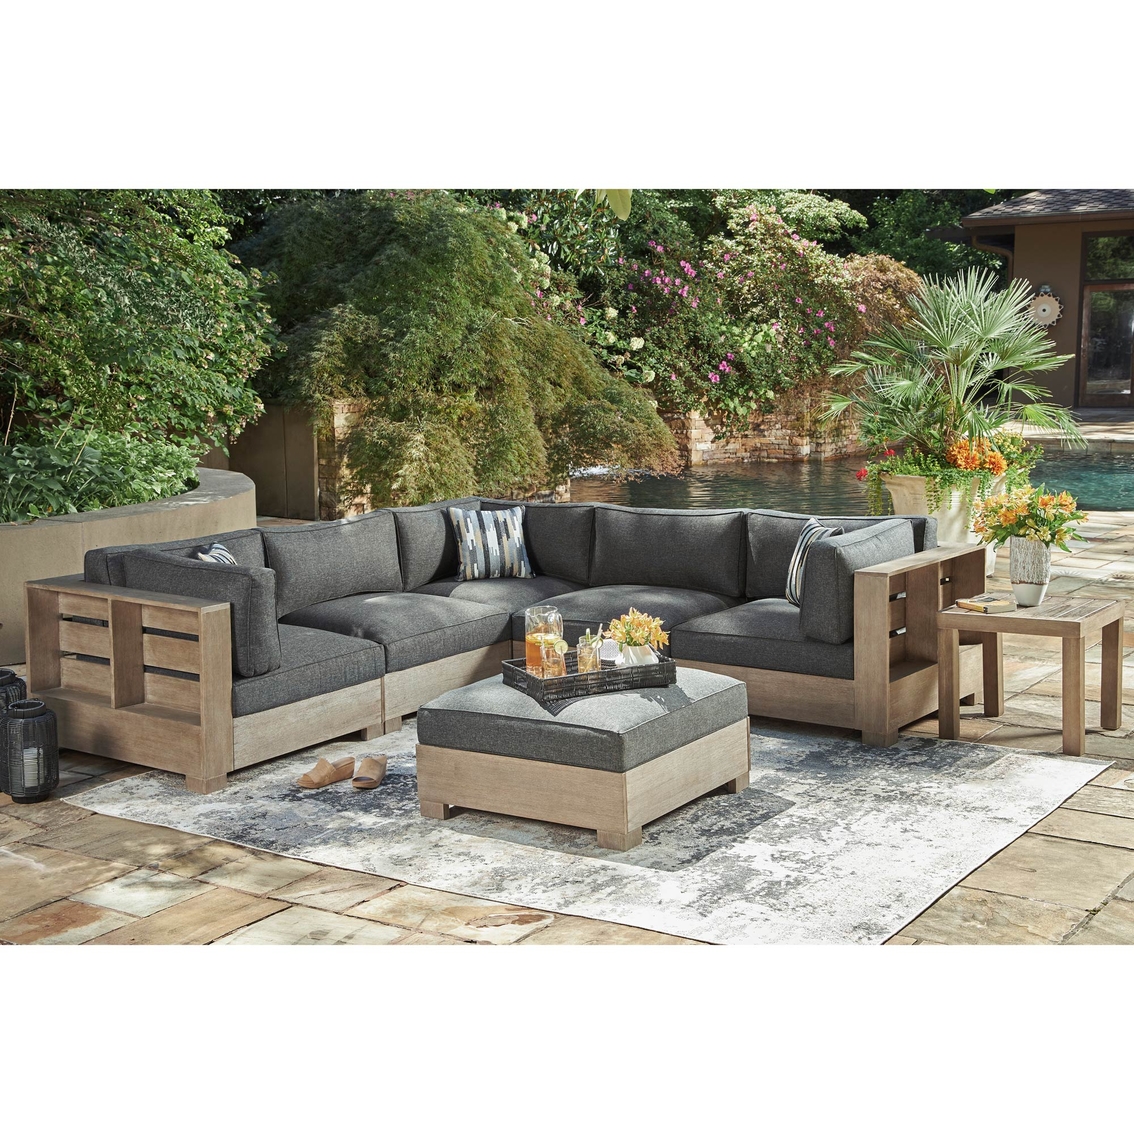 Signature Design by Ashley Citrine Park 6 pc. Outdoor Sectional with Coffee & End - Image 2 of 10